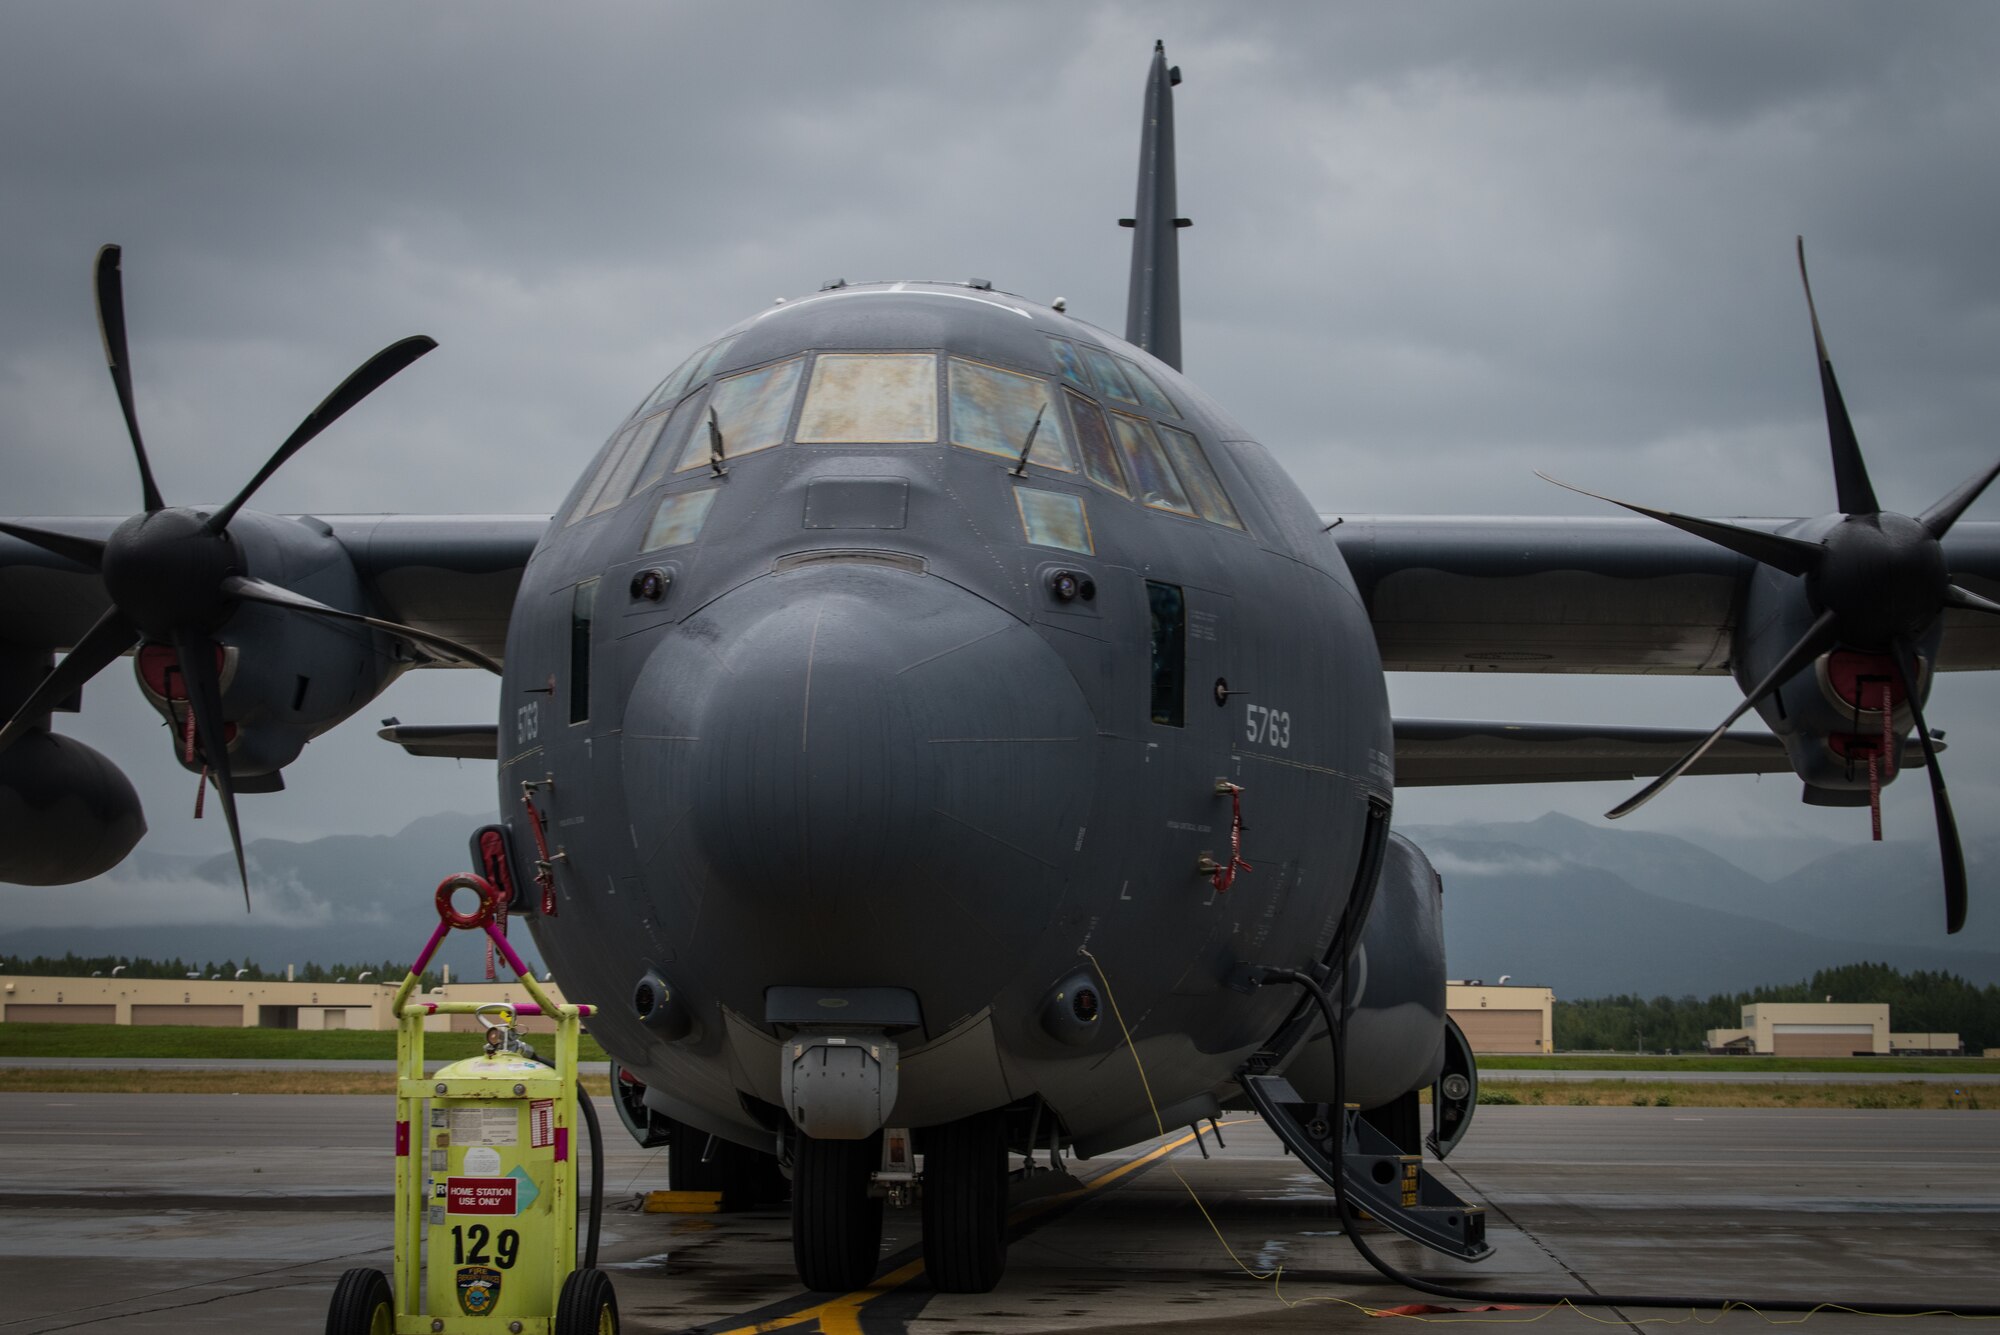 A C-130J Super Hercules from Kadena Air Force Base, Japan, rests on the flightline during Red Flag-Alaska at Joint Base Elmendorf-Richardson, Alaska, Aug. 13, 2018. RF-A is a Pacific Air Forces-directed field training exercise for U.S. and international forces flown under simulated air combat conditions. RF-A exercises are focused on improving the combat readiness of U.S. and international forces and providing training for units preparing for air expeditionary force taskings.